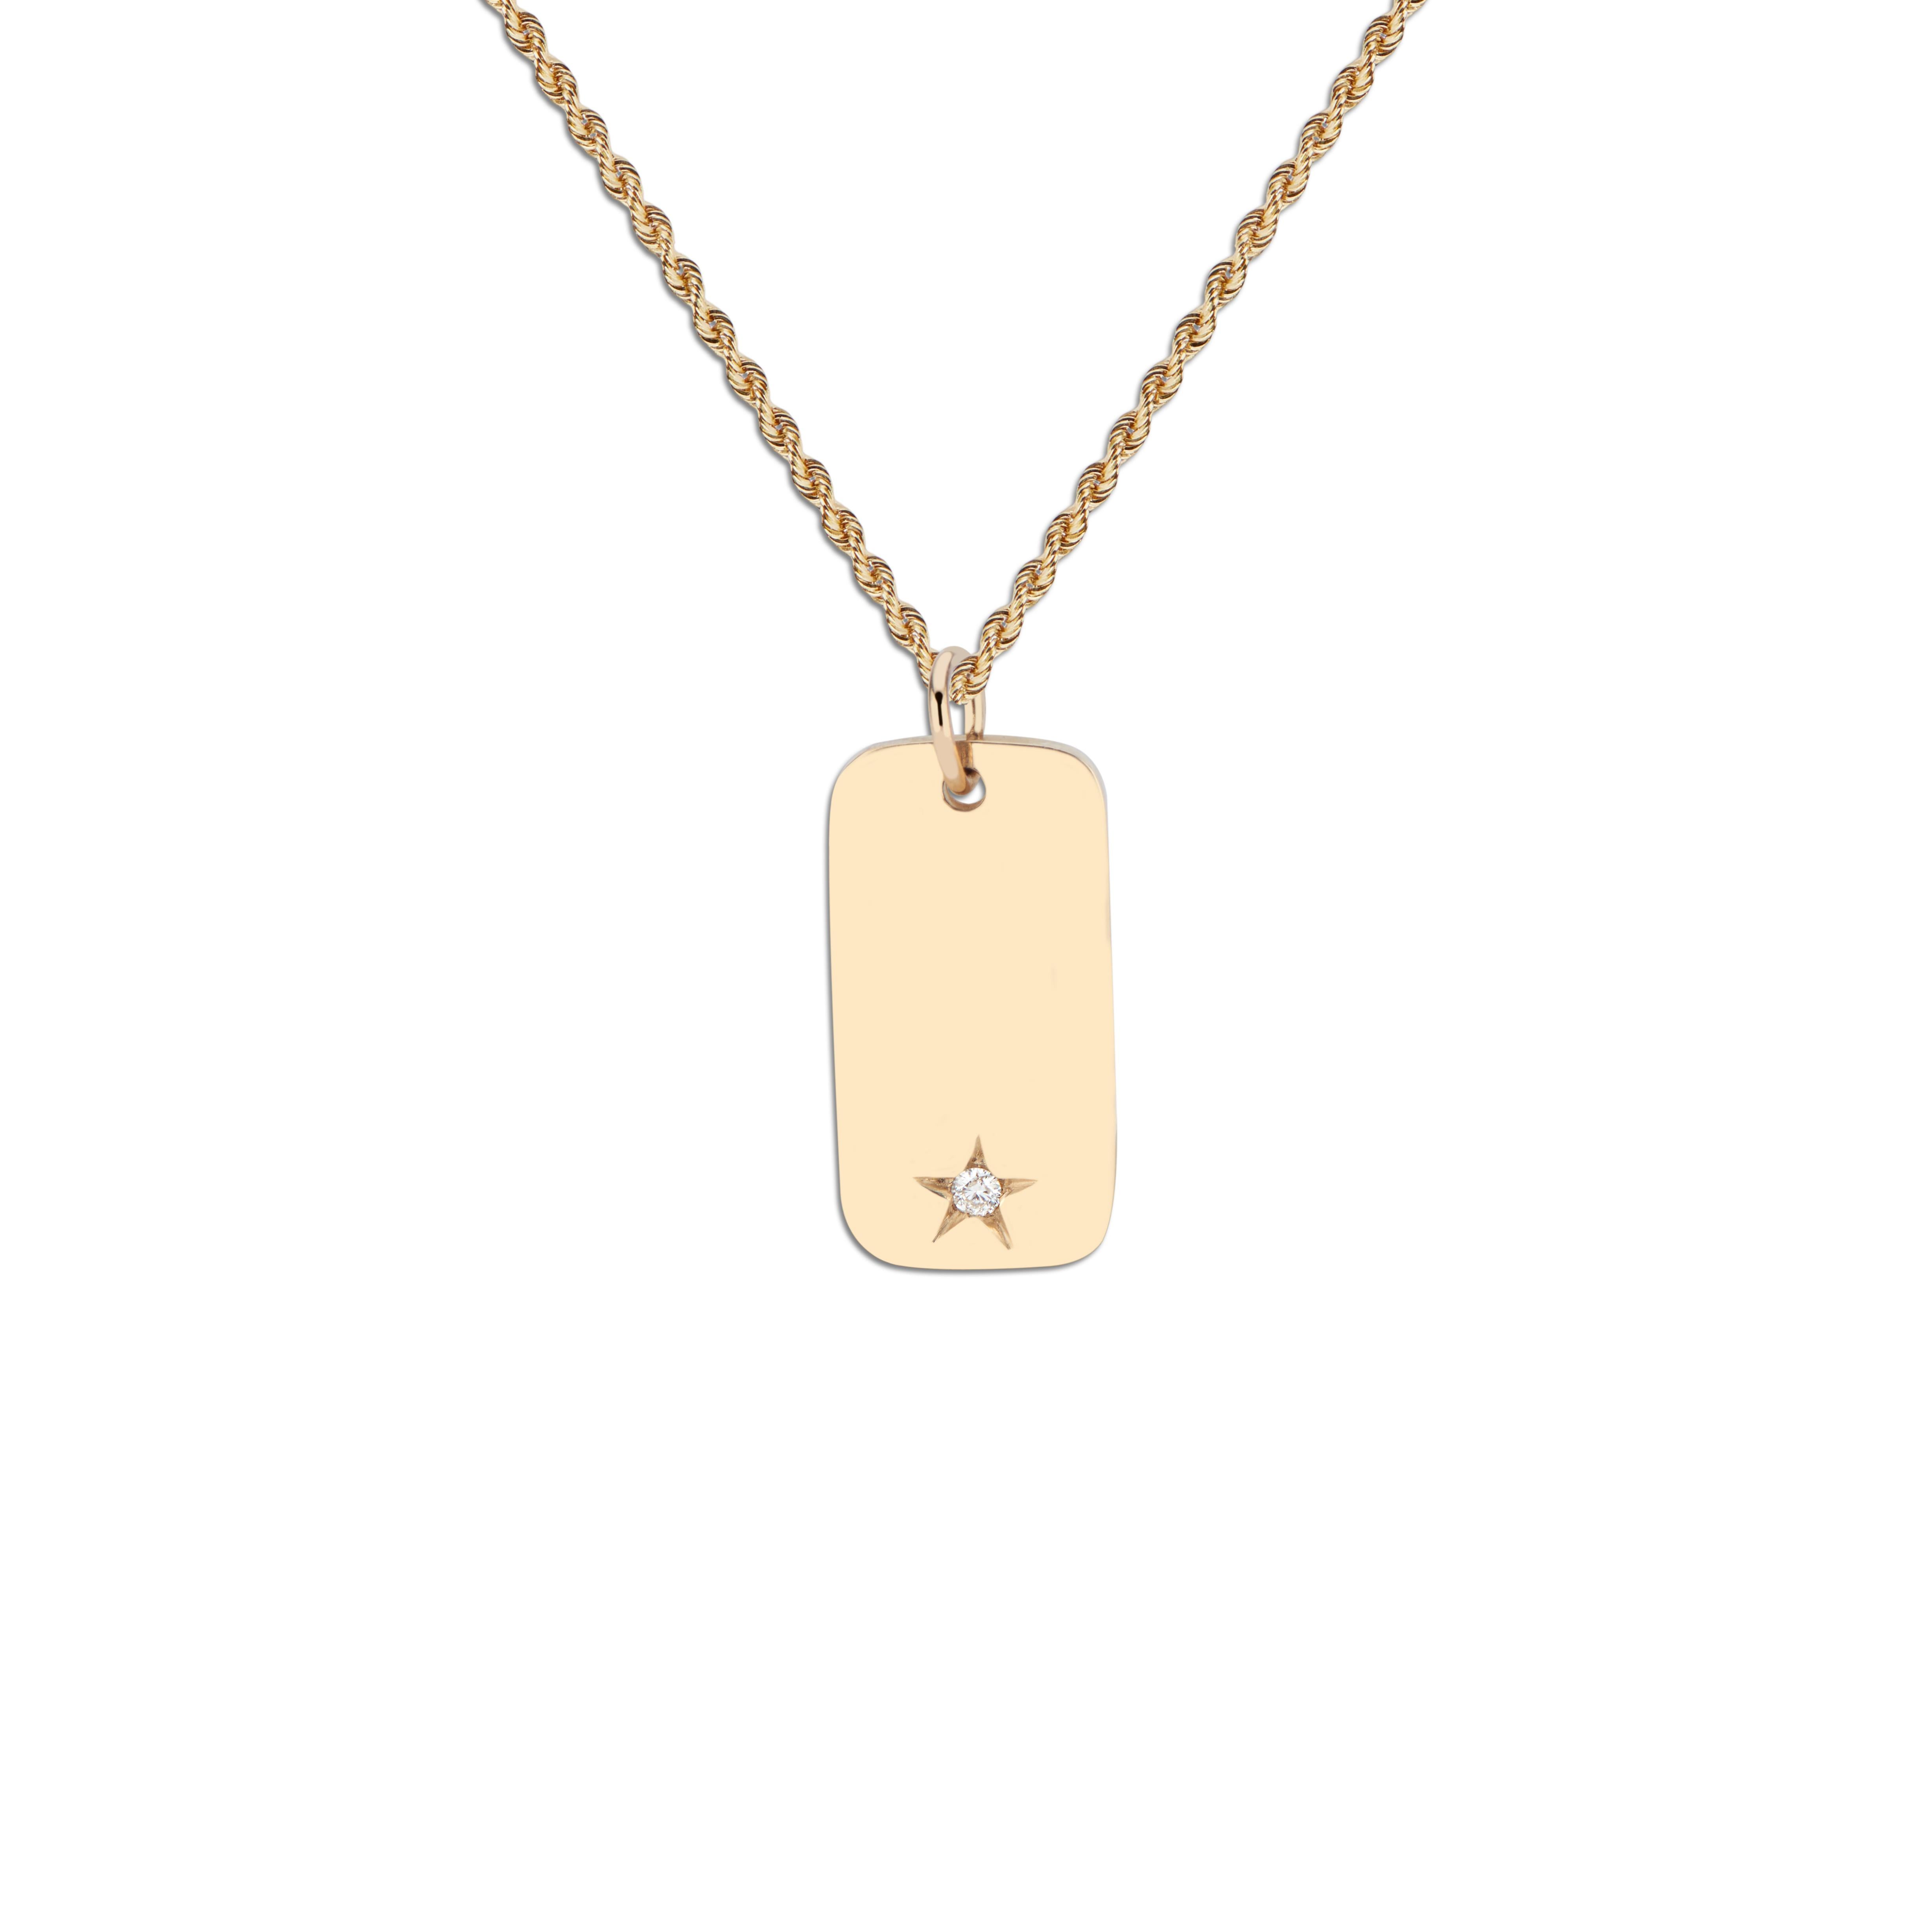 This 14k gold Memento Tag features a star engraving with a diamond setting.  It can be engraved with initials or a special date, or it can be worn plain to show its sleek, polished shine.

This Tag is ready to ship.

